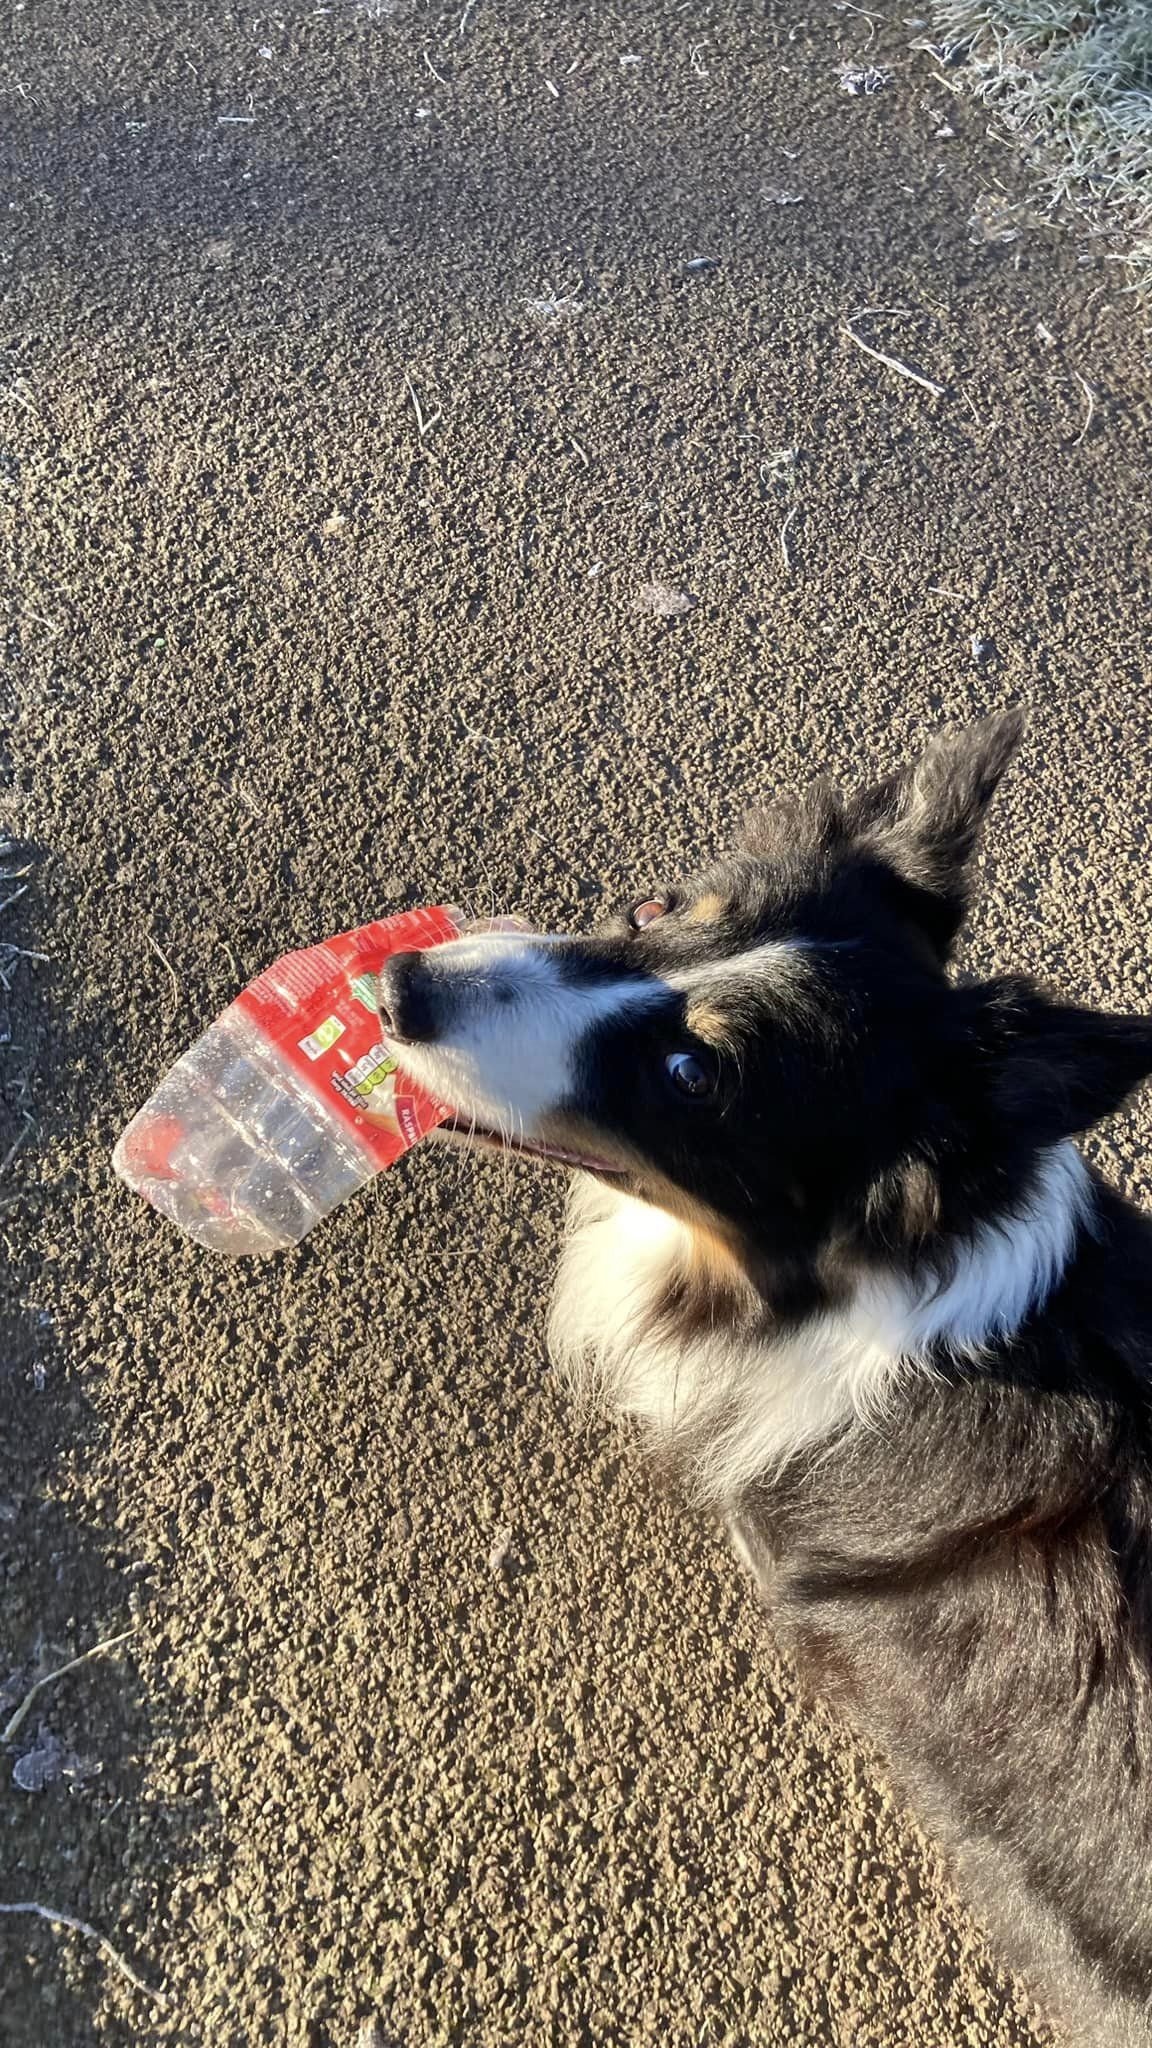 Scruff the border collie looking up happily with a plastic bottle in his mouth.